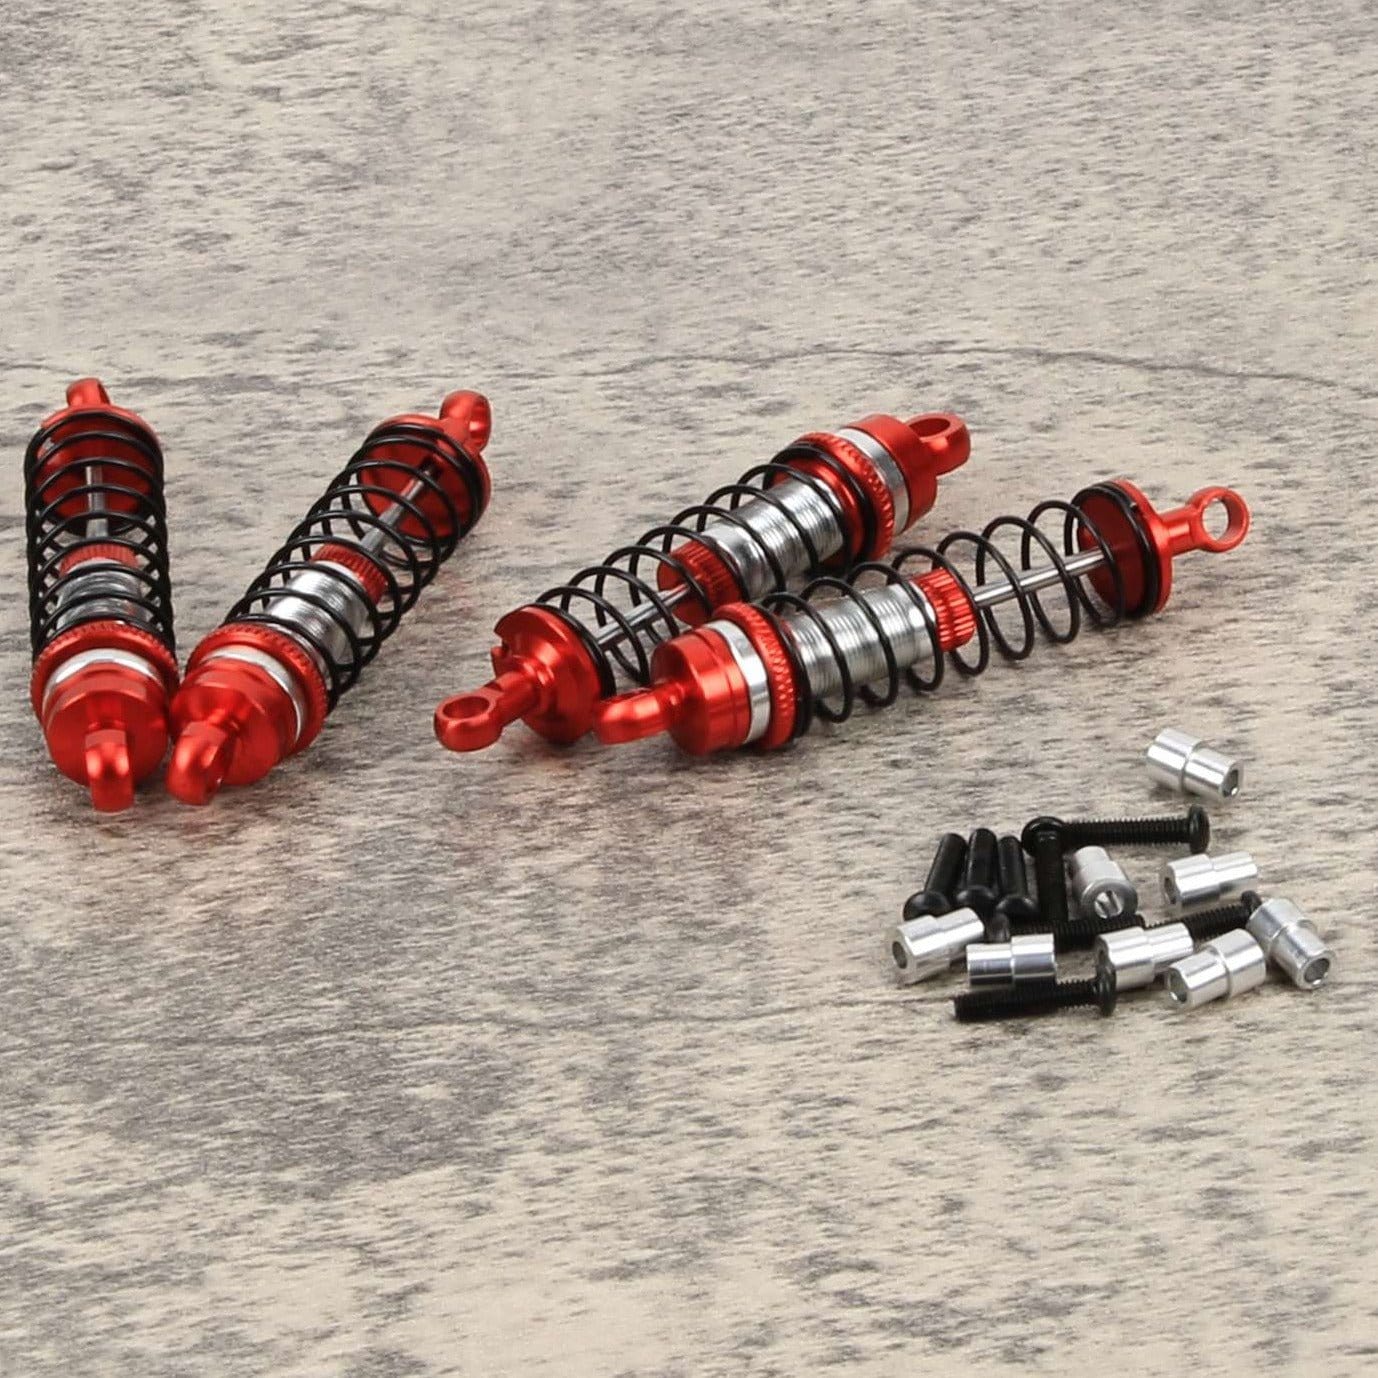 RCAWD Traxxas Latrax Red / 4pcs RCAWD 65mm Oil-filled Shock Absorber for 1/18 Traxxas Latrax Upgrades